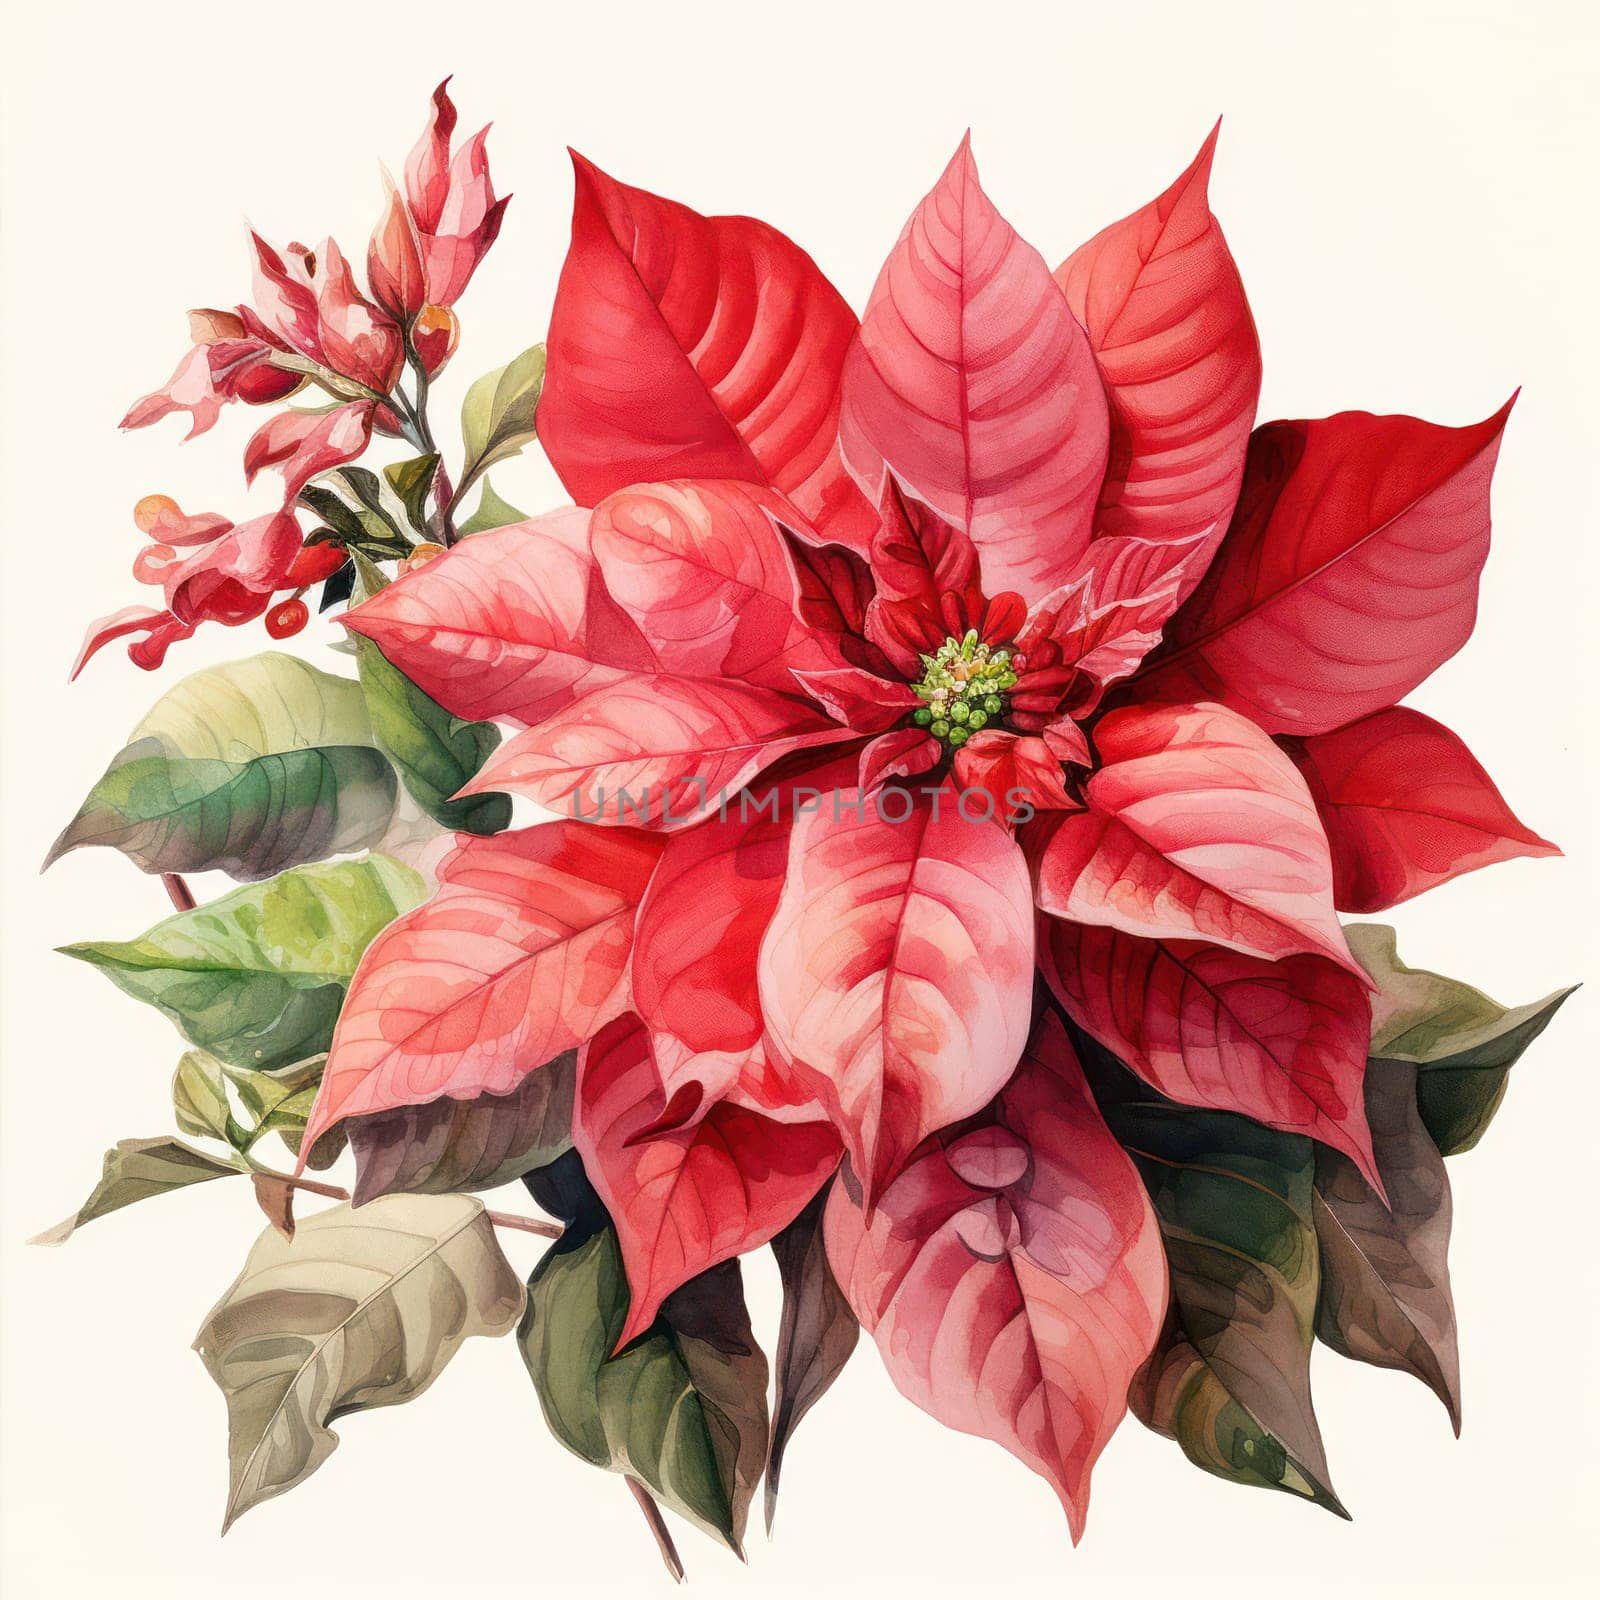 Red Poinsettia: Festive Holiday Floral Illustration with Watercolor Effect on a Bright and Merry Christmas Card by Vichizh